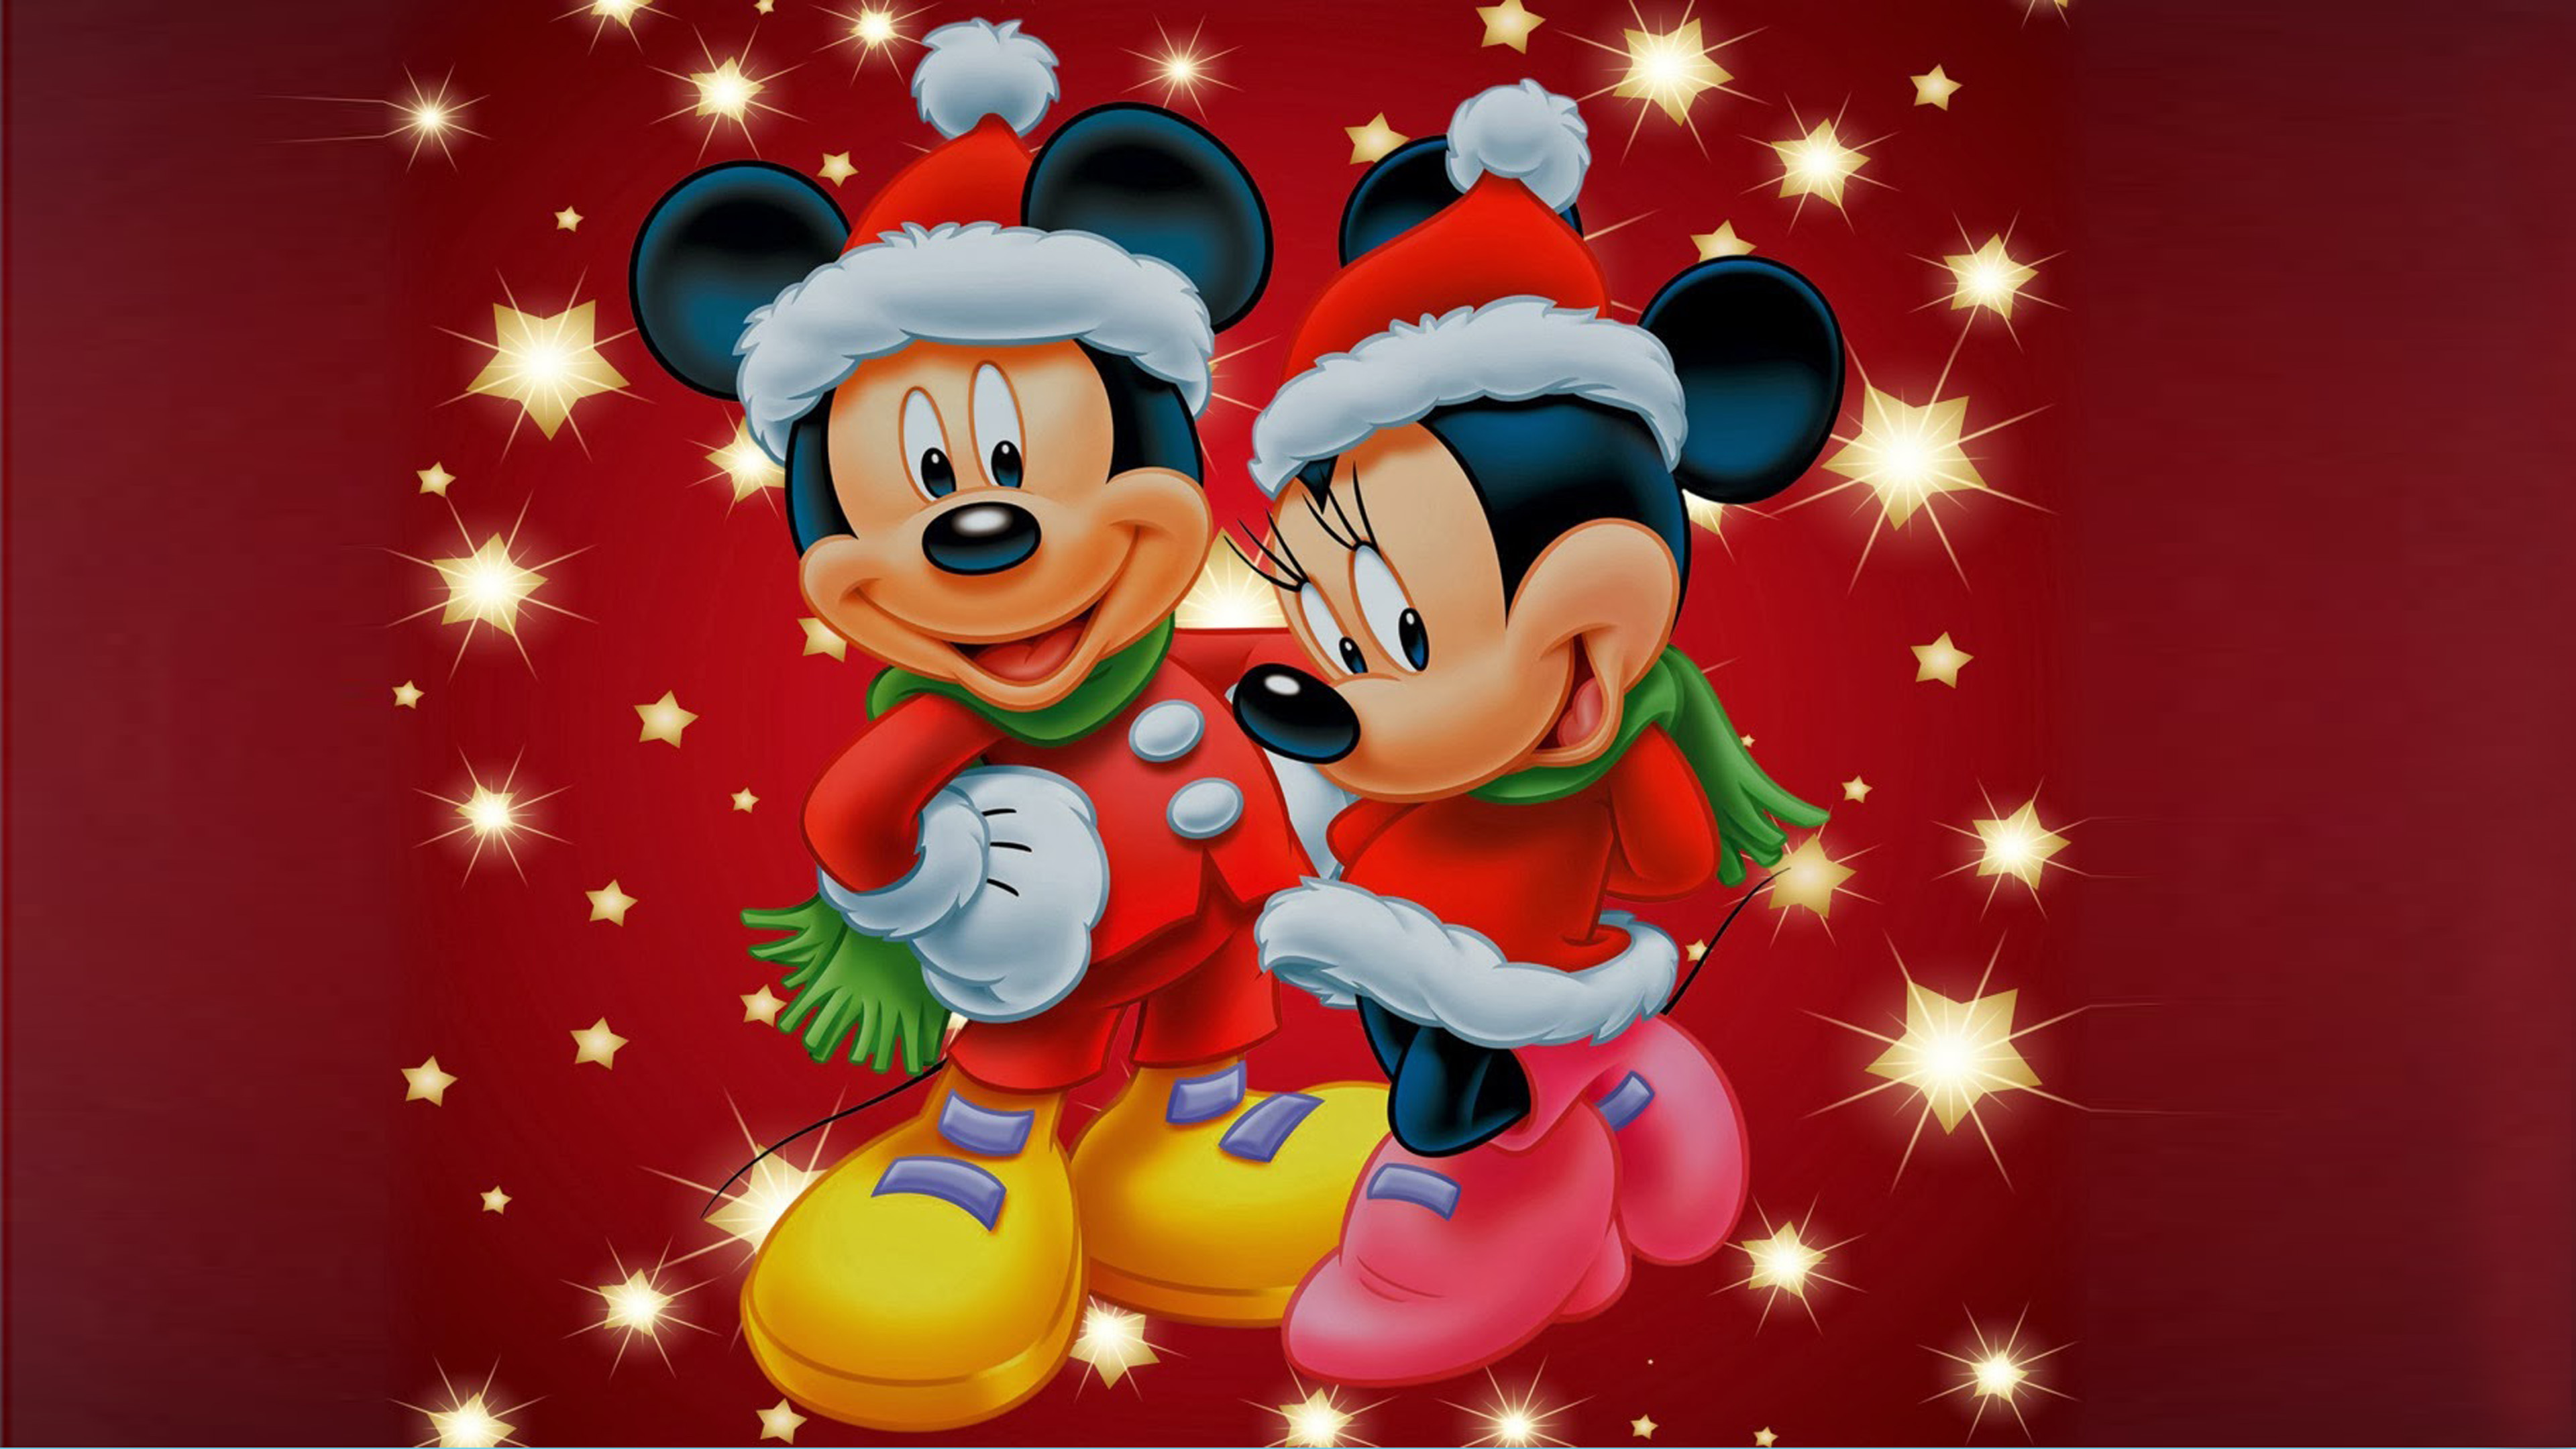 Mickey And Minnie Mouse Christmas Theme Desktop Wallpaper HD For Mobile Phones And Laptops 3840x2160, Wallpaper13.com